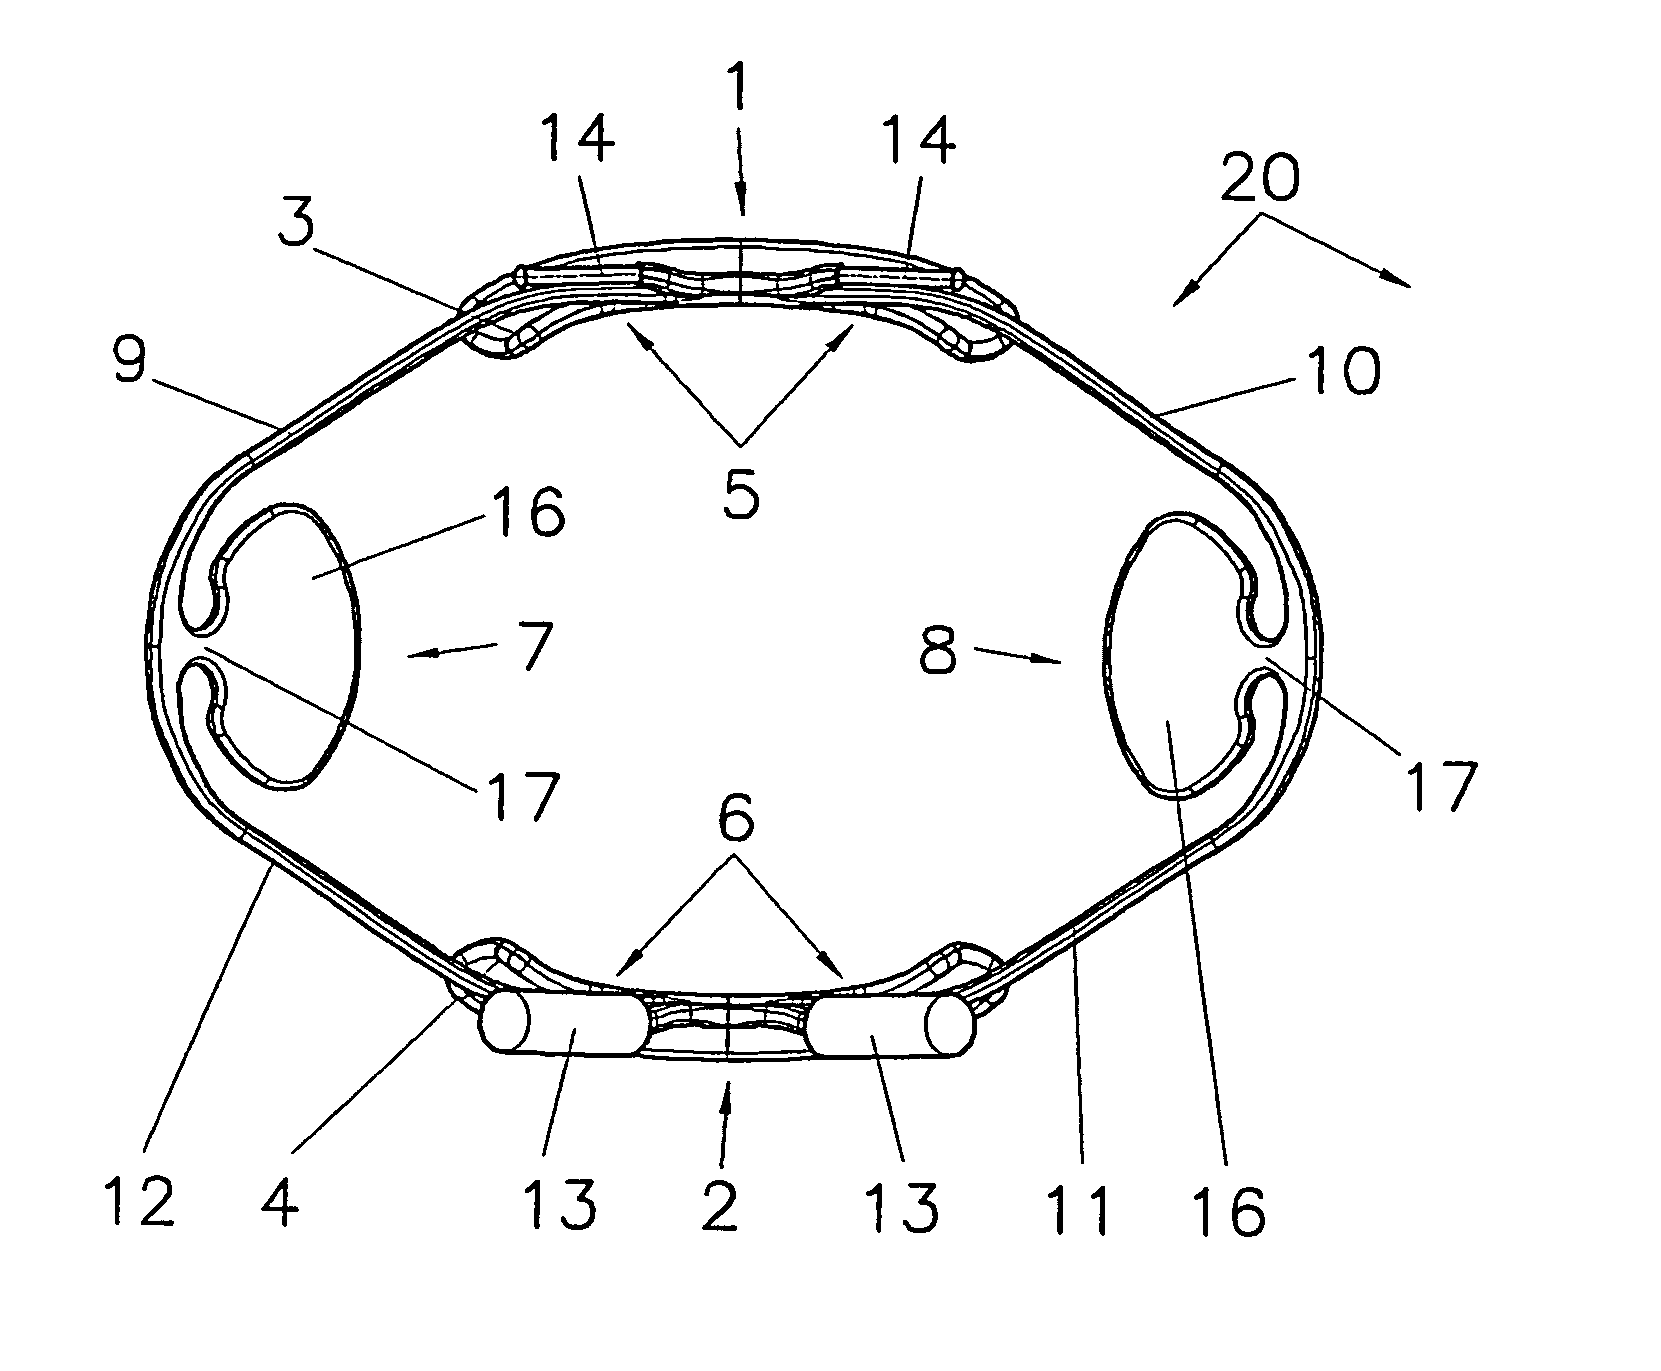 Cheek and lip retractor for dentistry